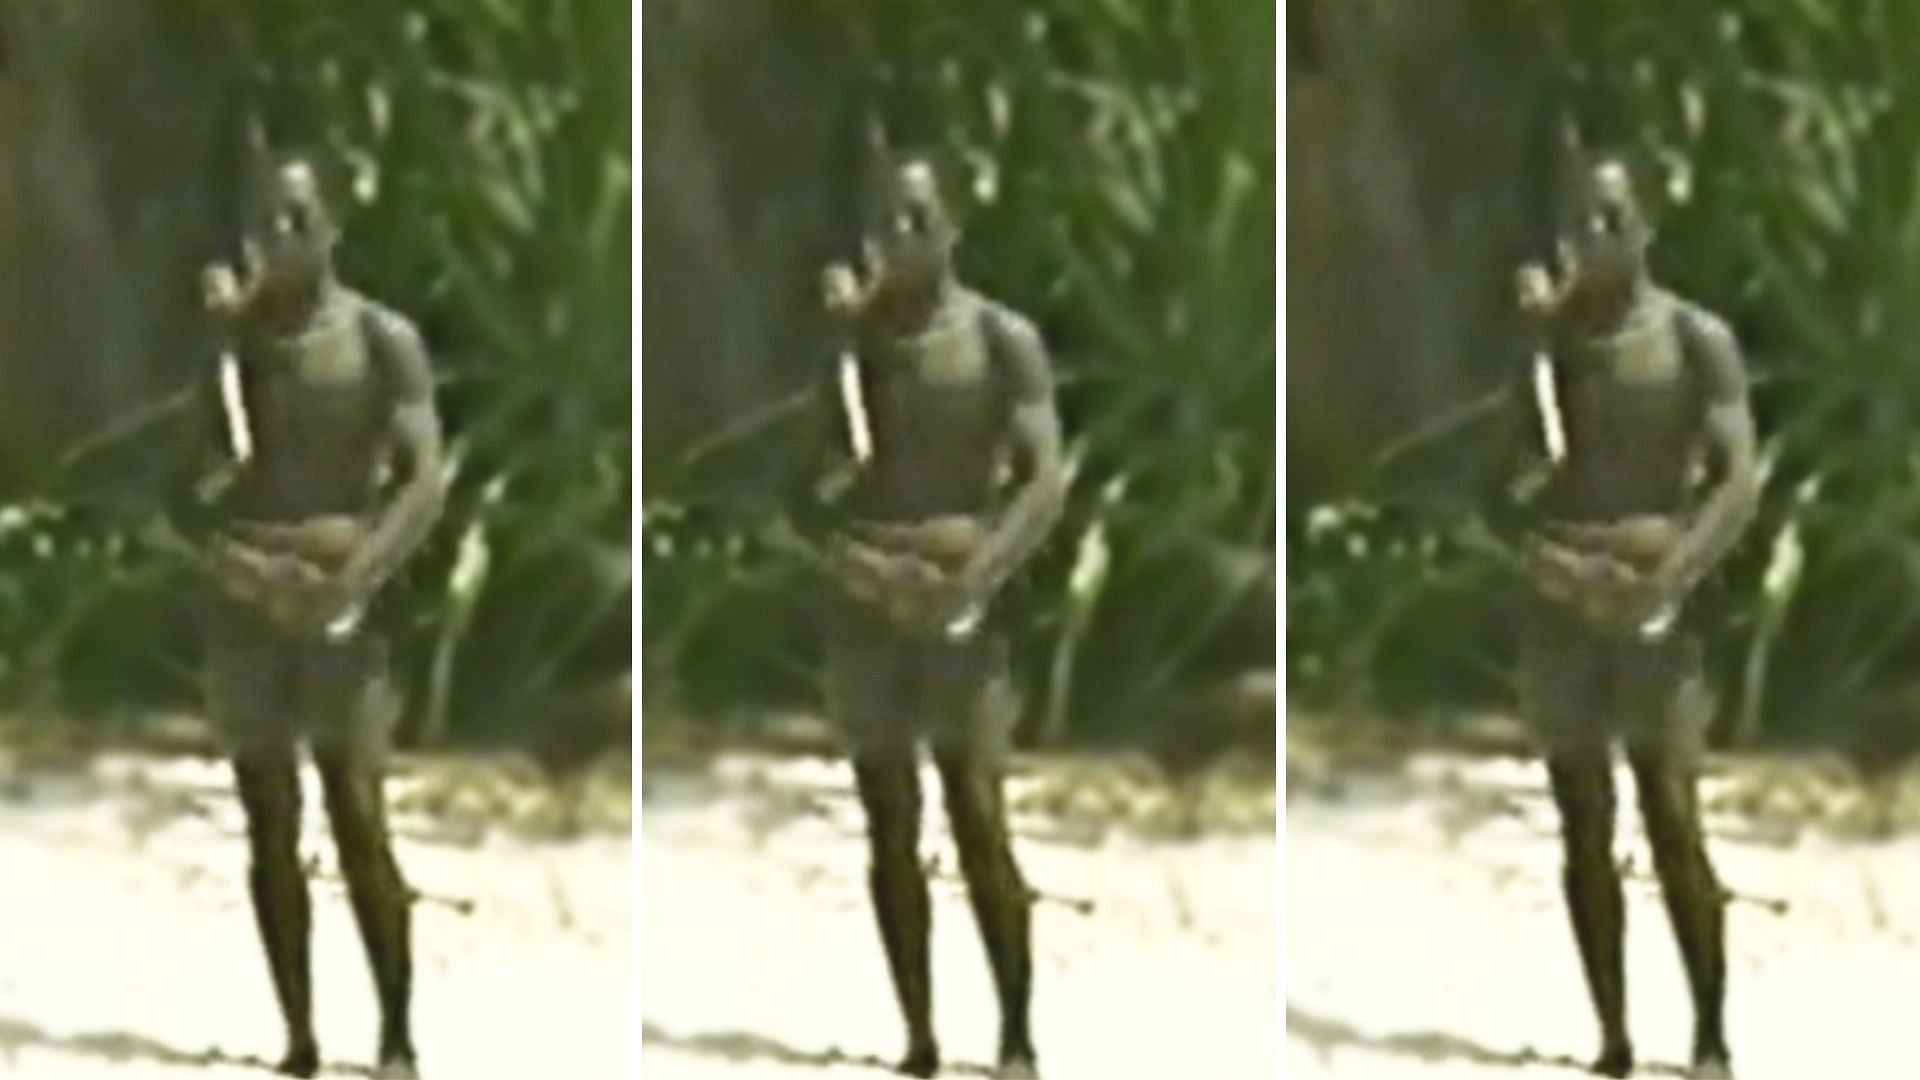 Image of Sentinelese people used for representational purposes.